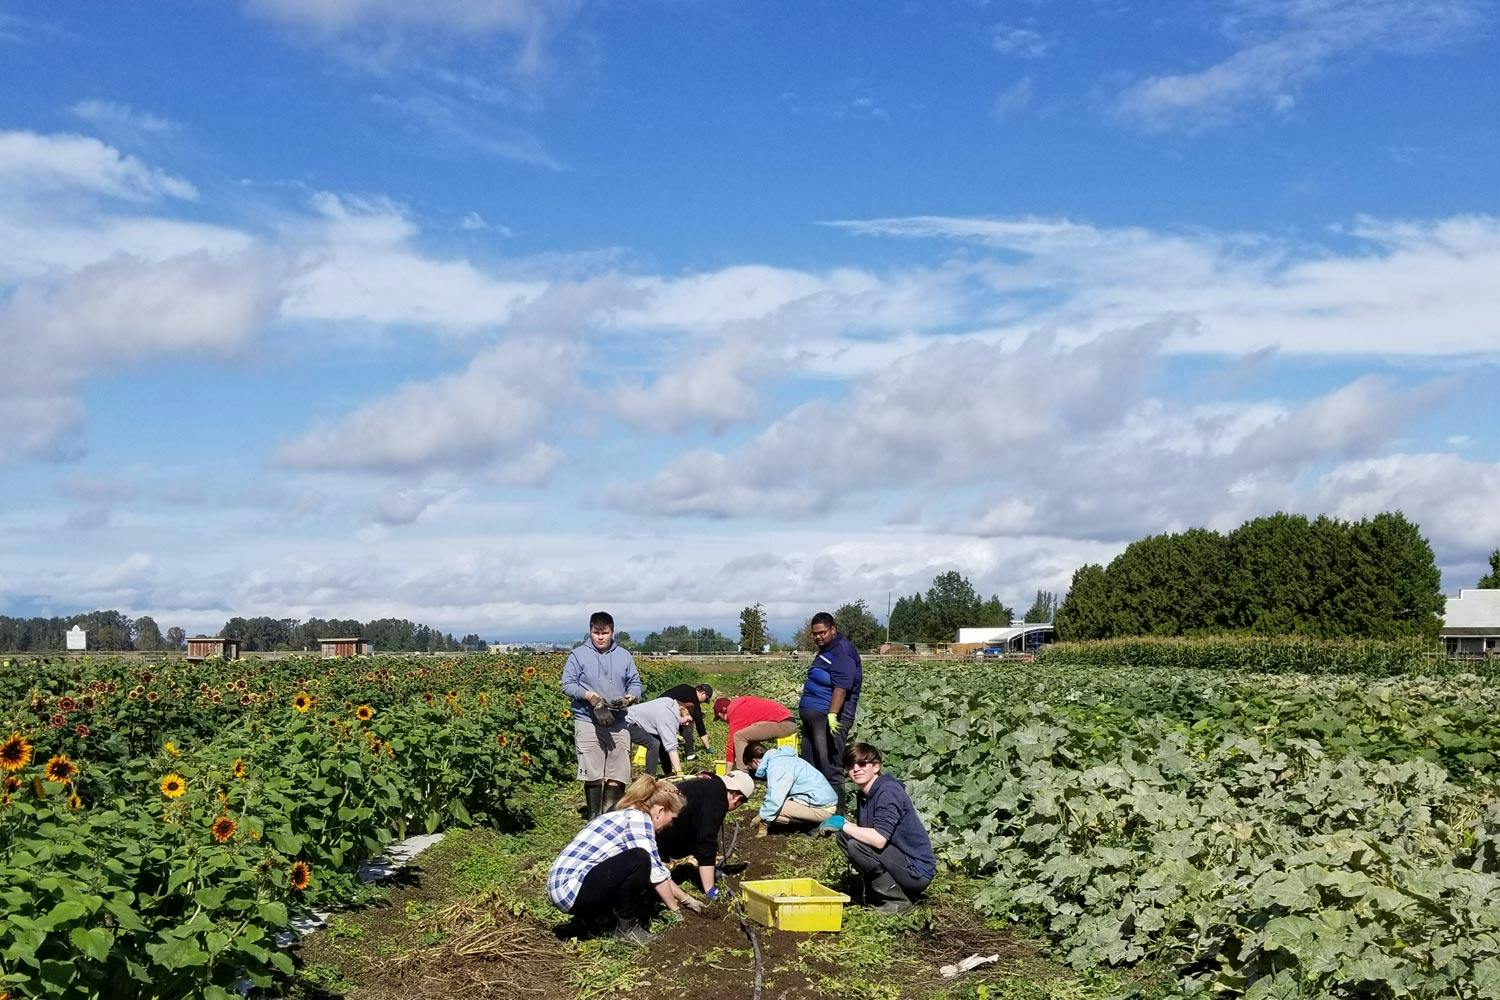 A group of students tend to the soil in the middle of a sunflower field, under a blue sky with clouds.